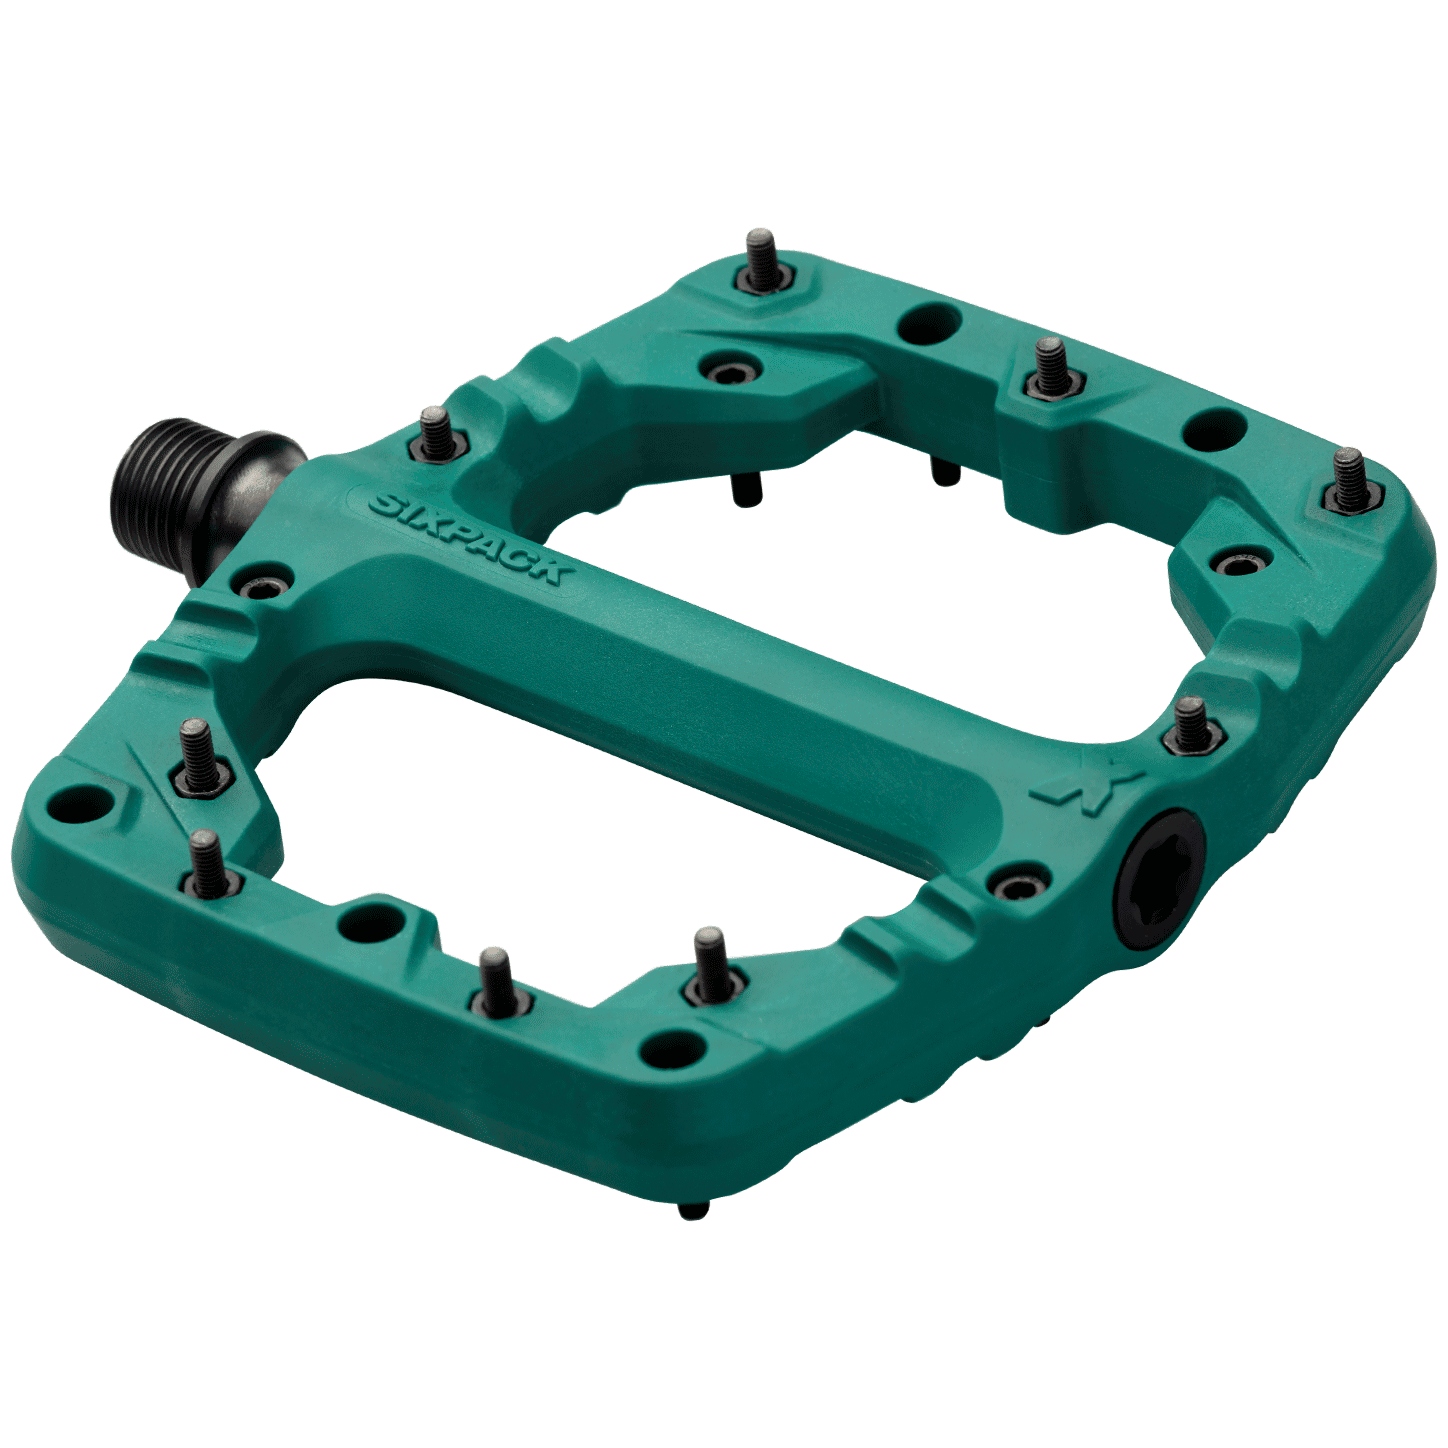 Picture of Sixpack Kamikaze PA Flat Pedals - pine green